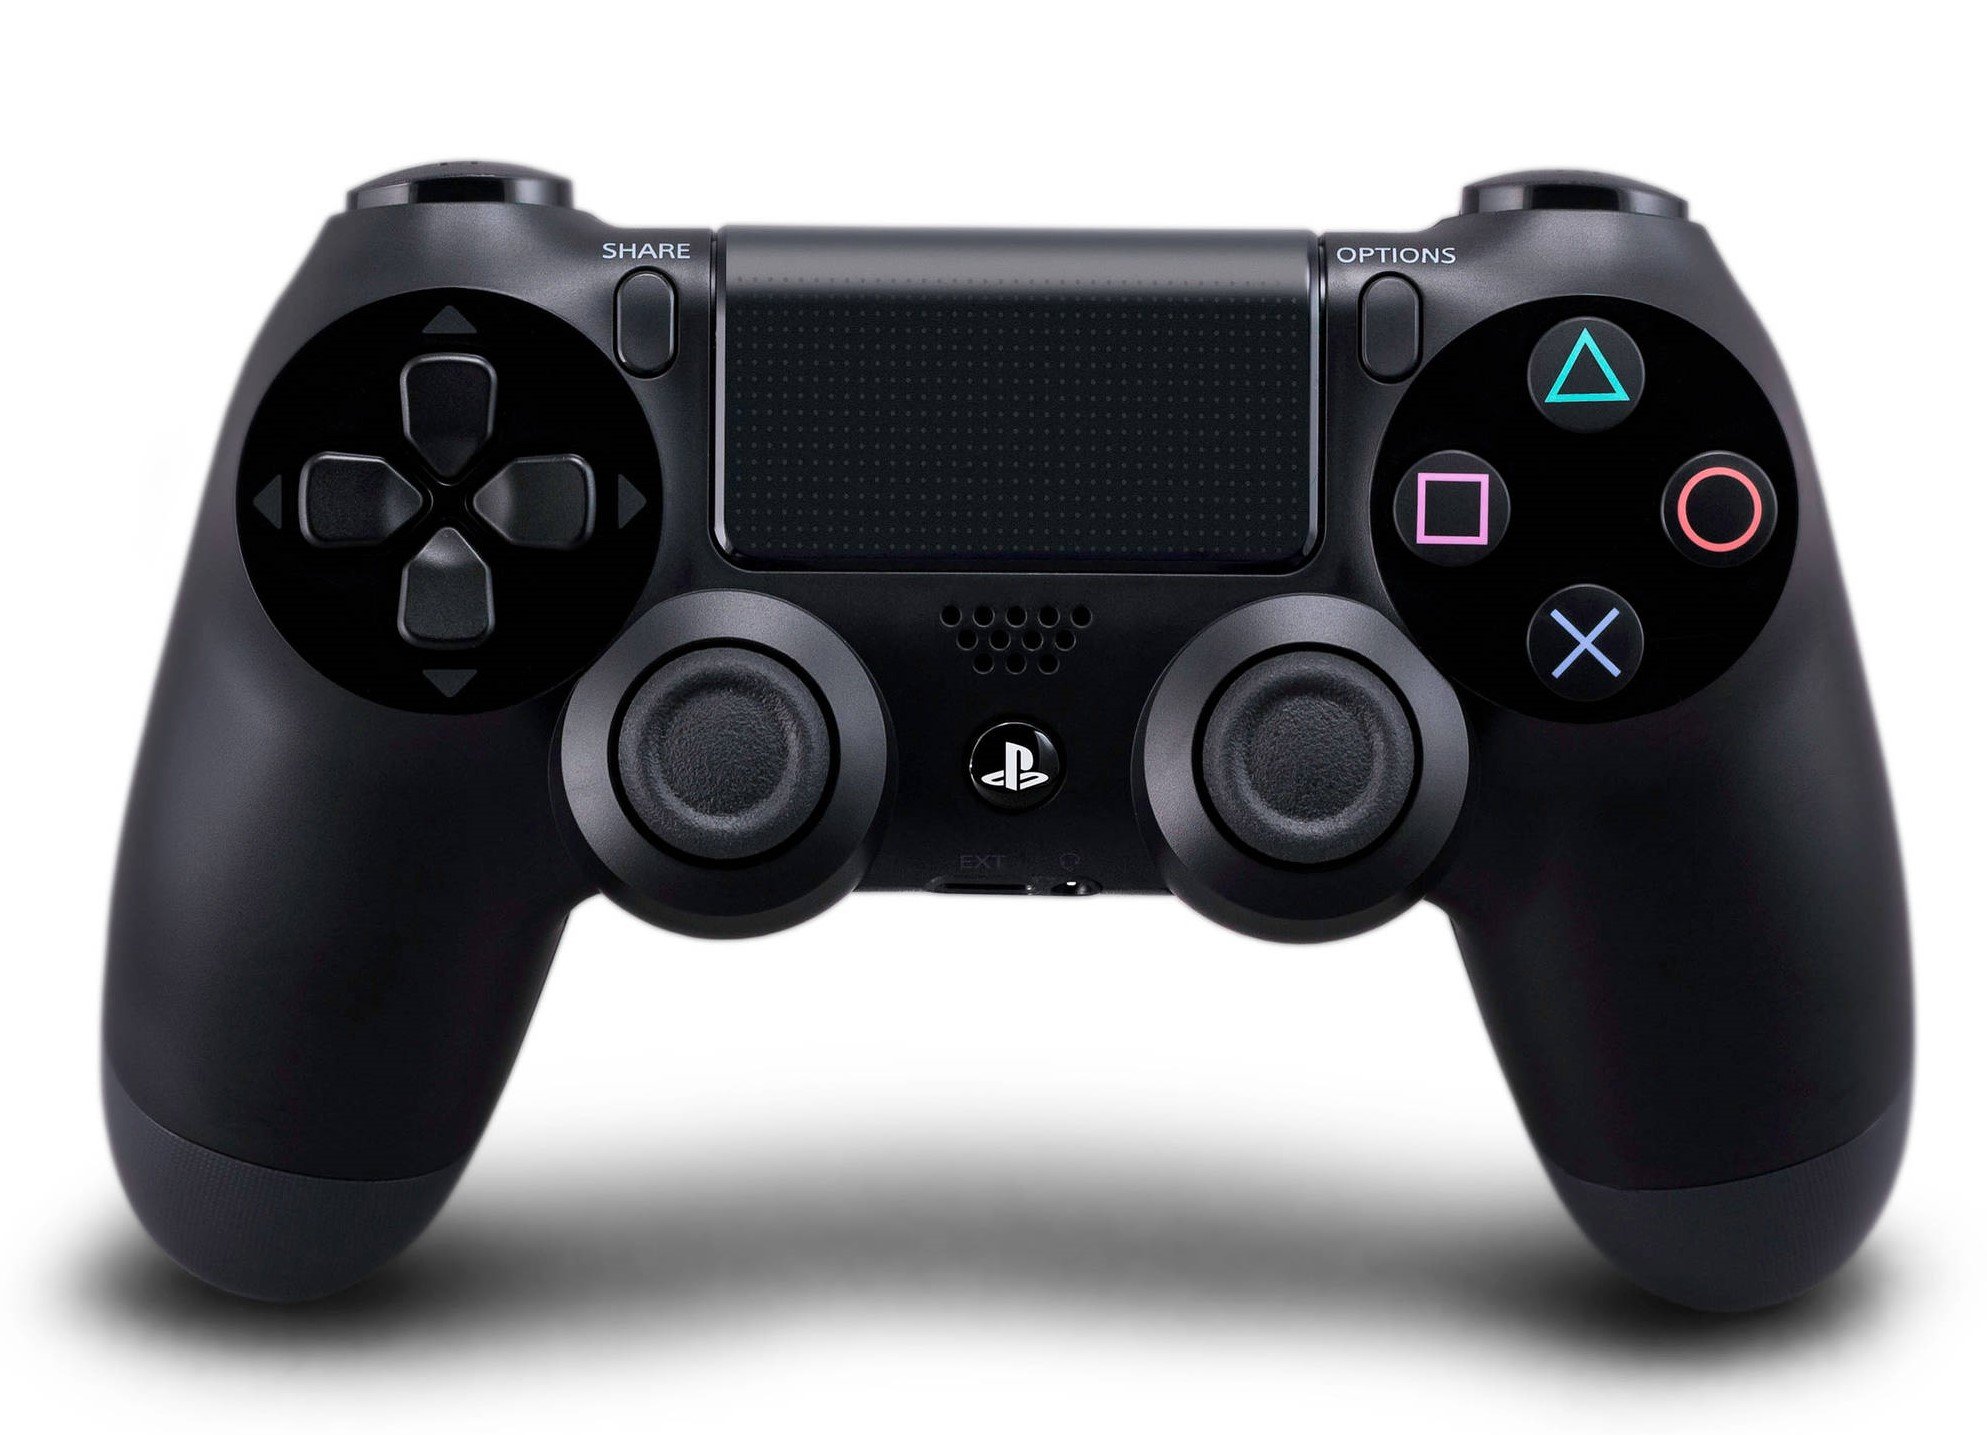 Steams beta client now supports PS4 controller